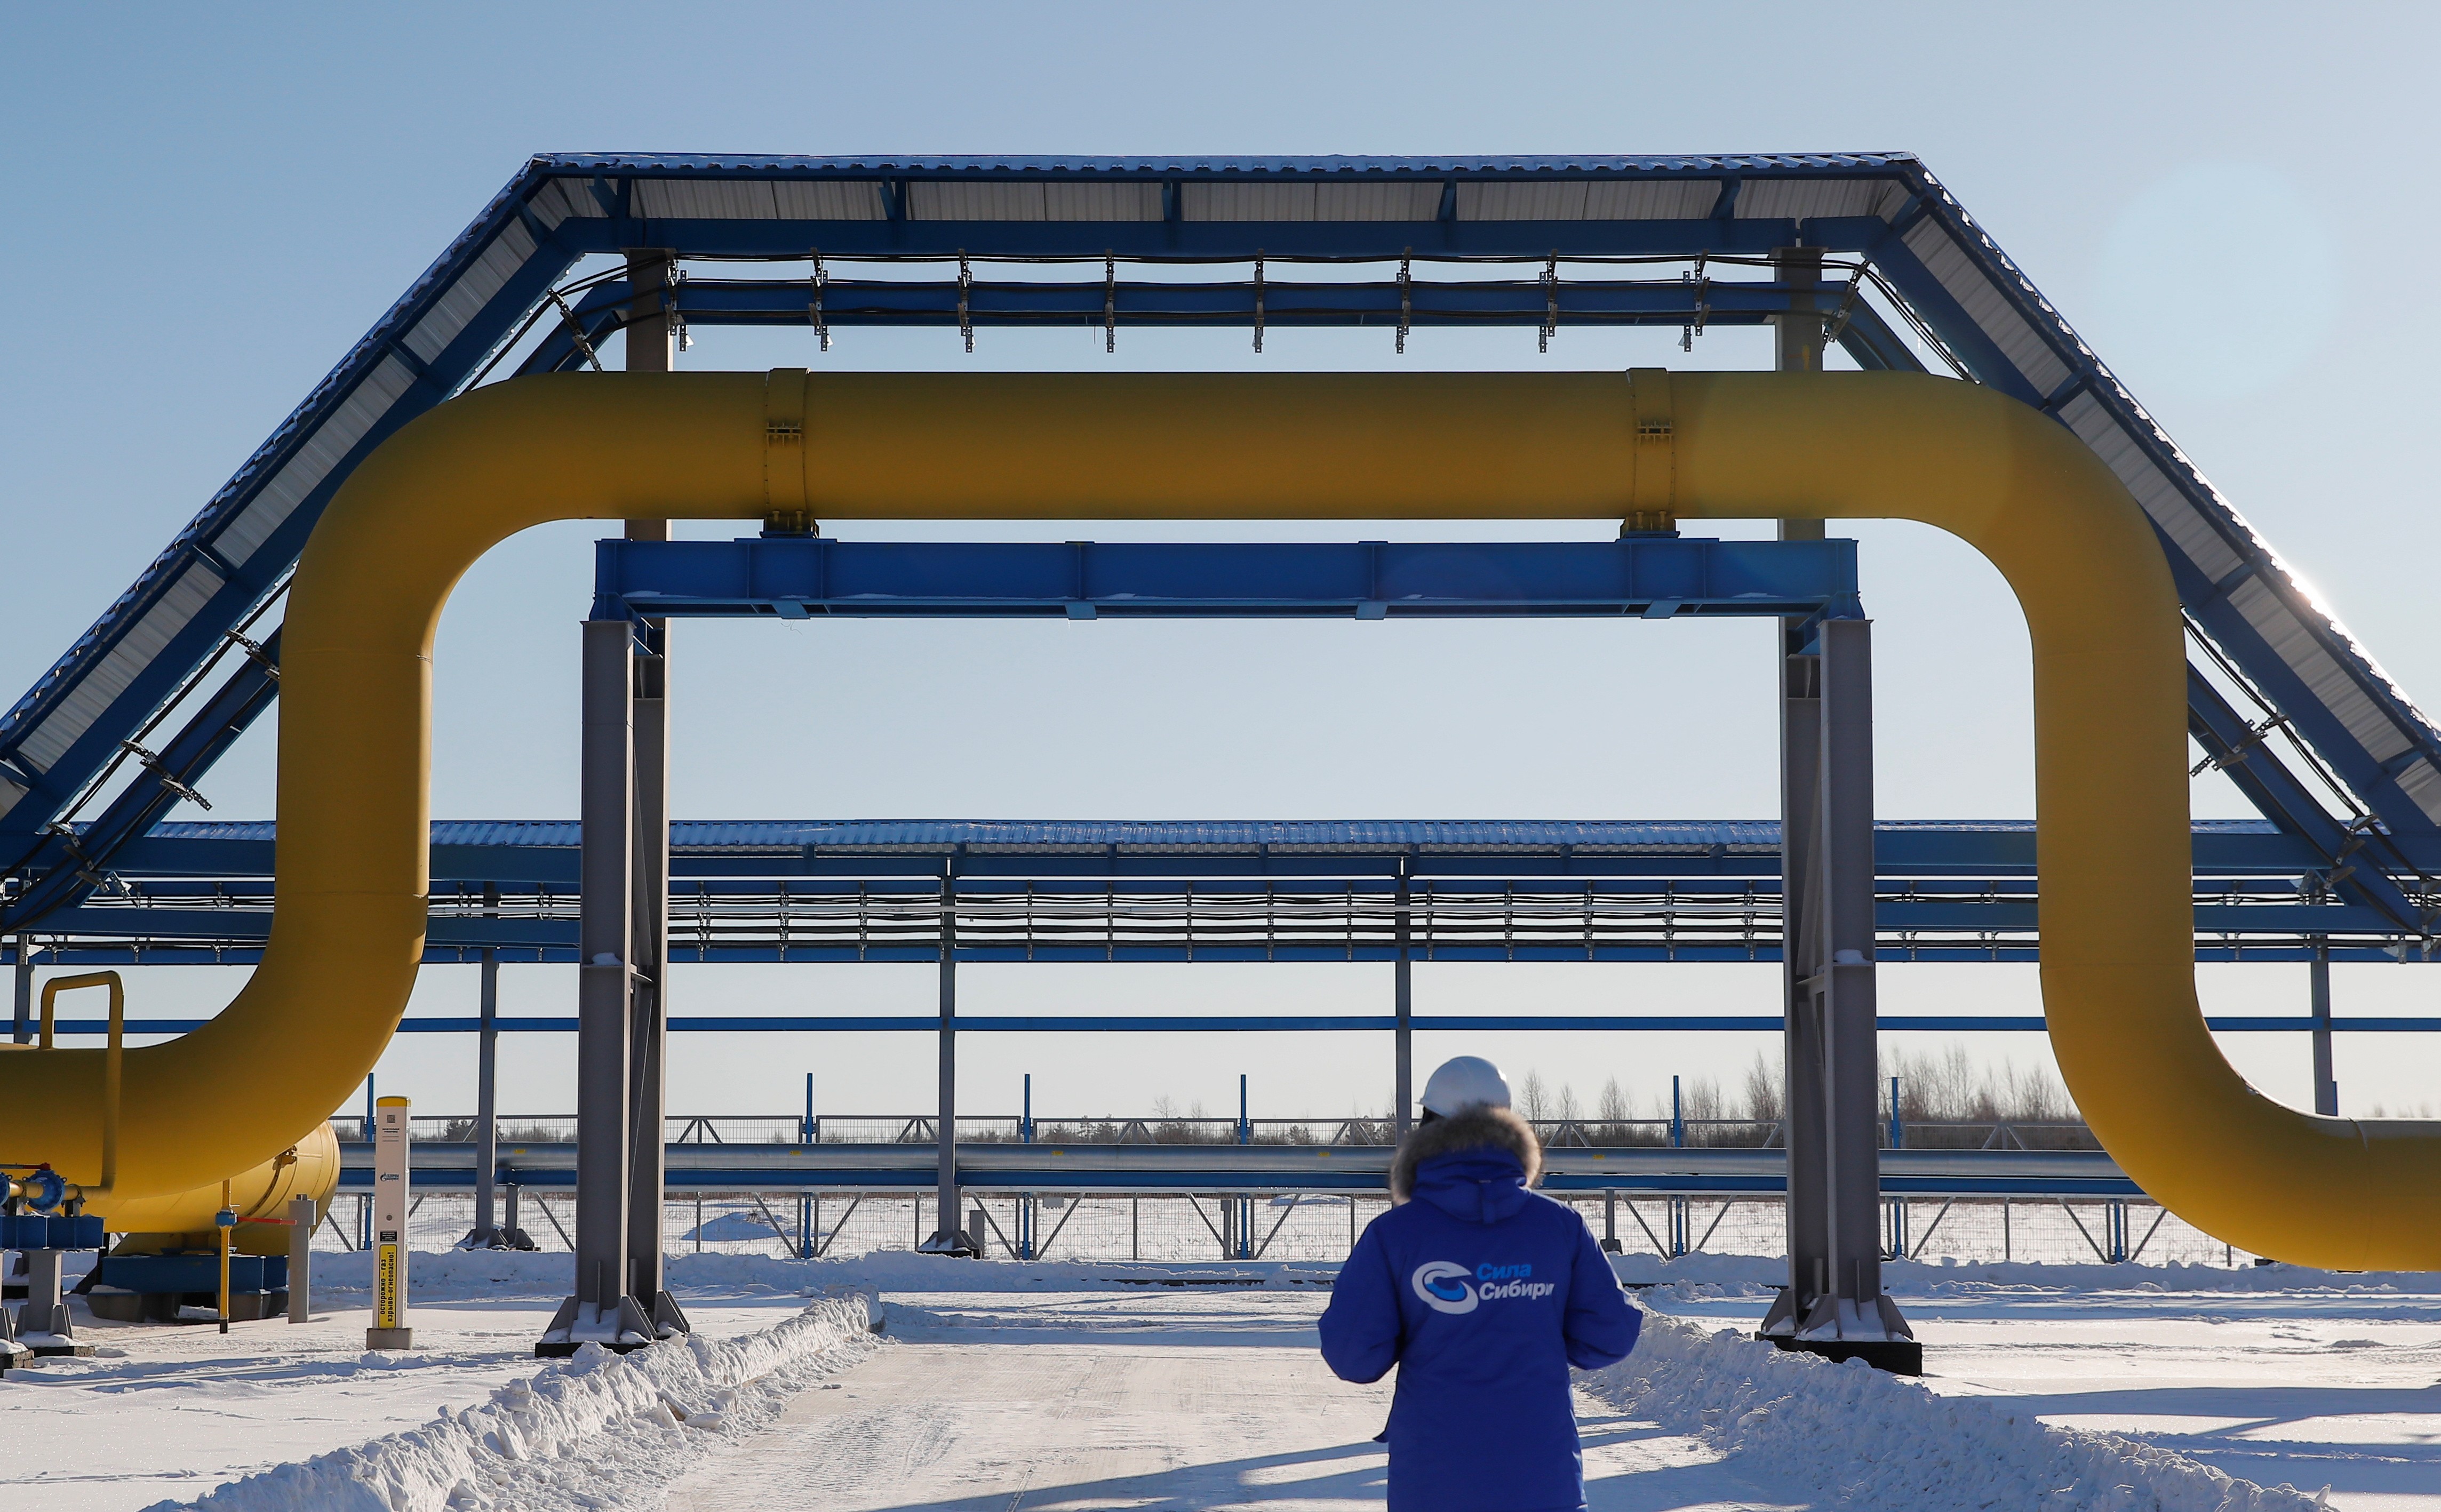 A Gazprom employee surveys the Power Of Siberia gas pipeline at the Atamanskaya compressor station in Russia’s Amur region on November 29. Photo: Reuters